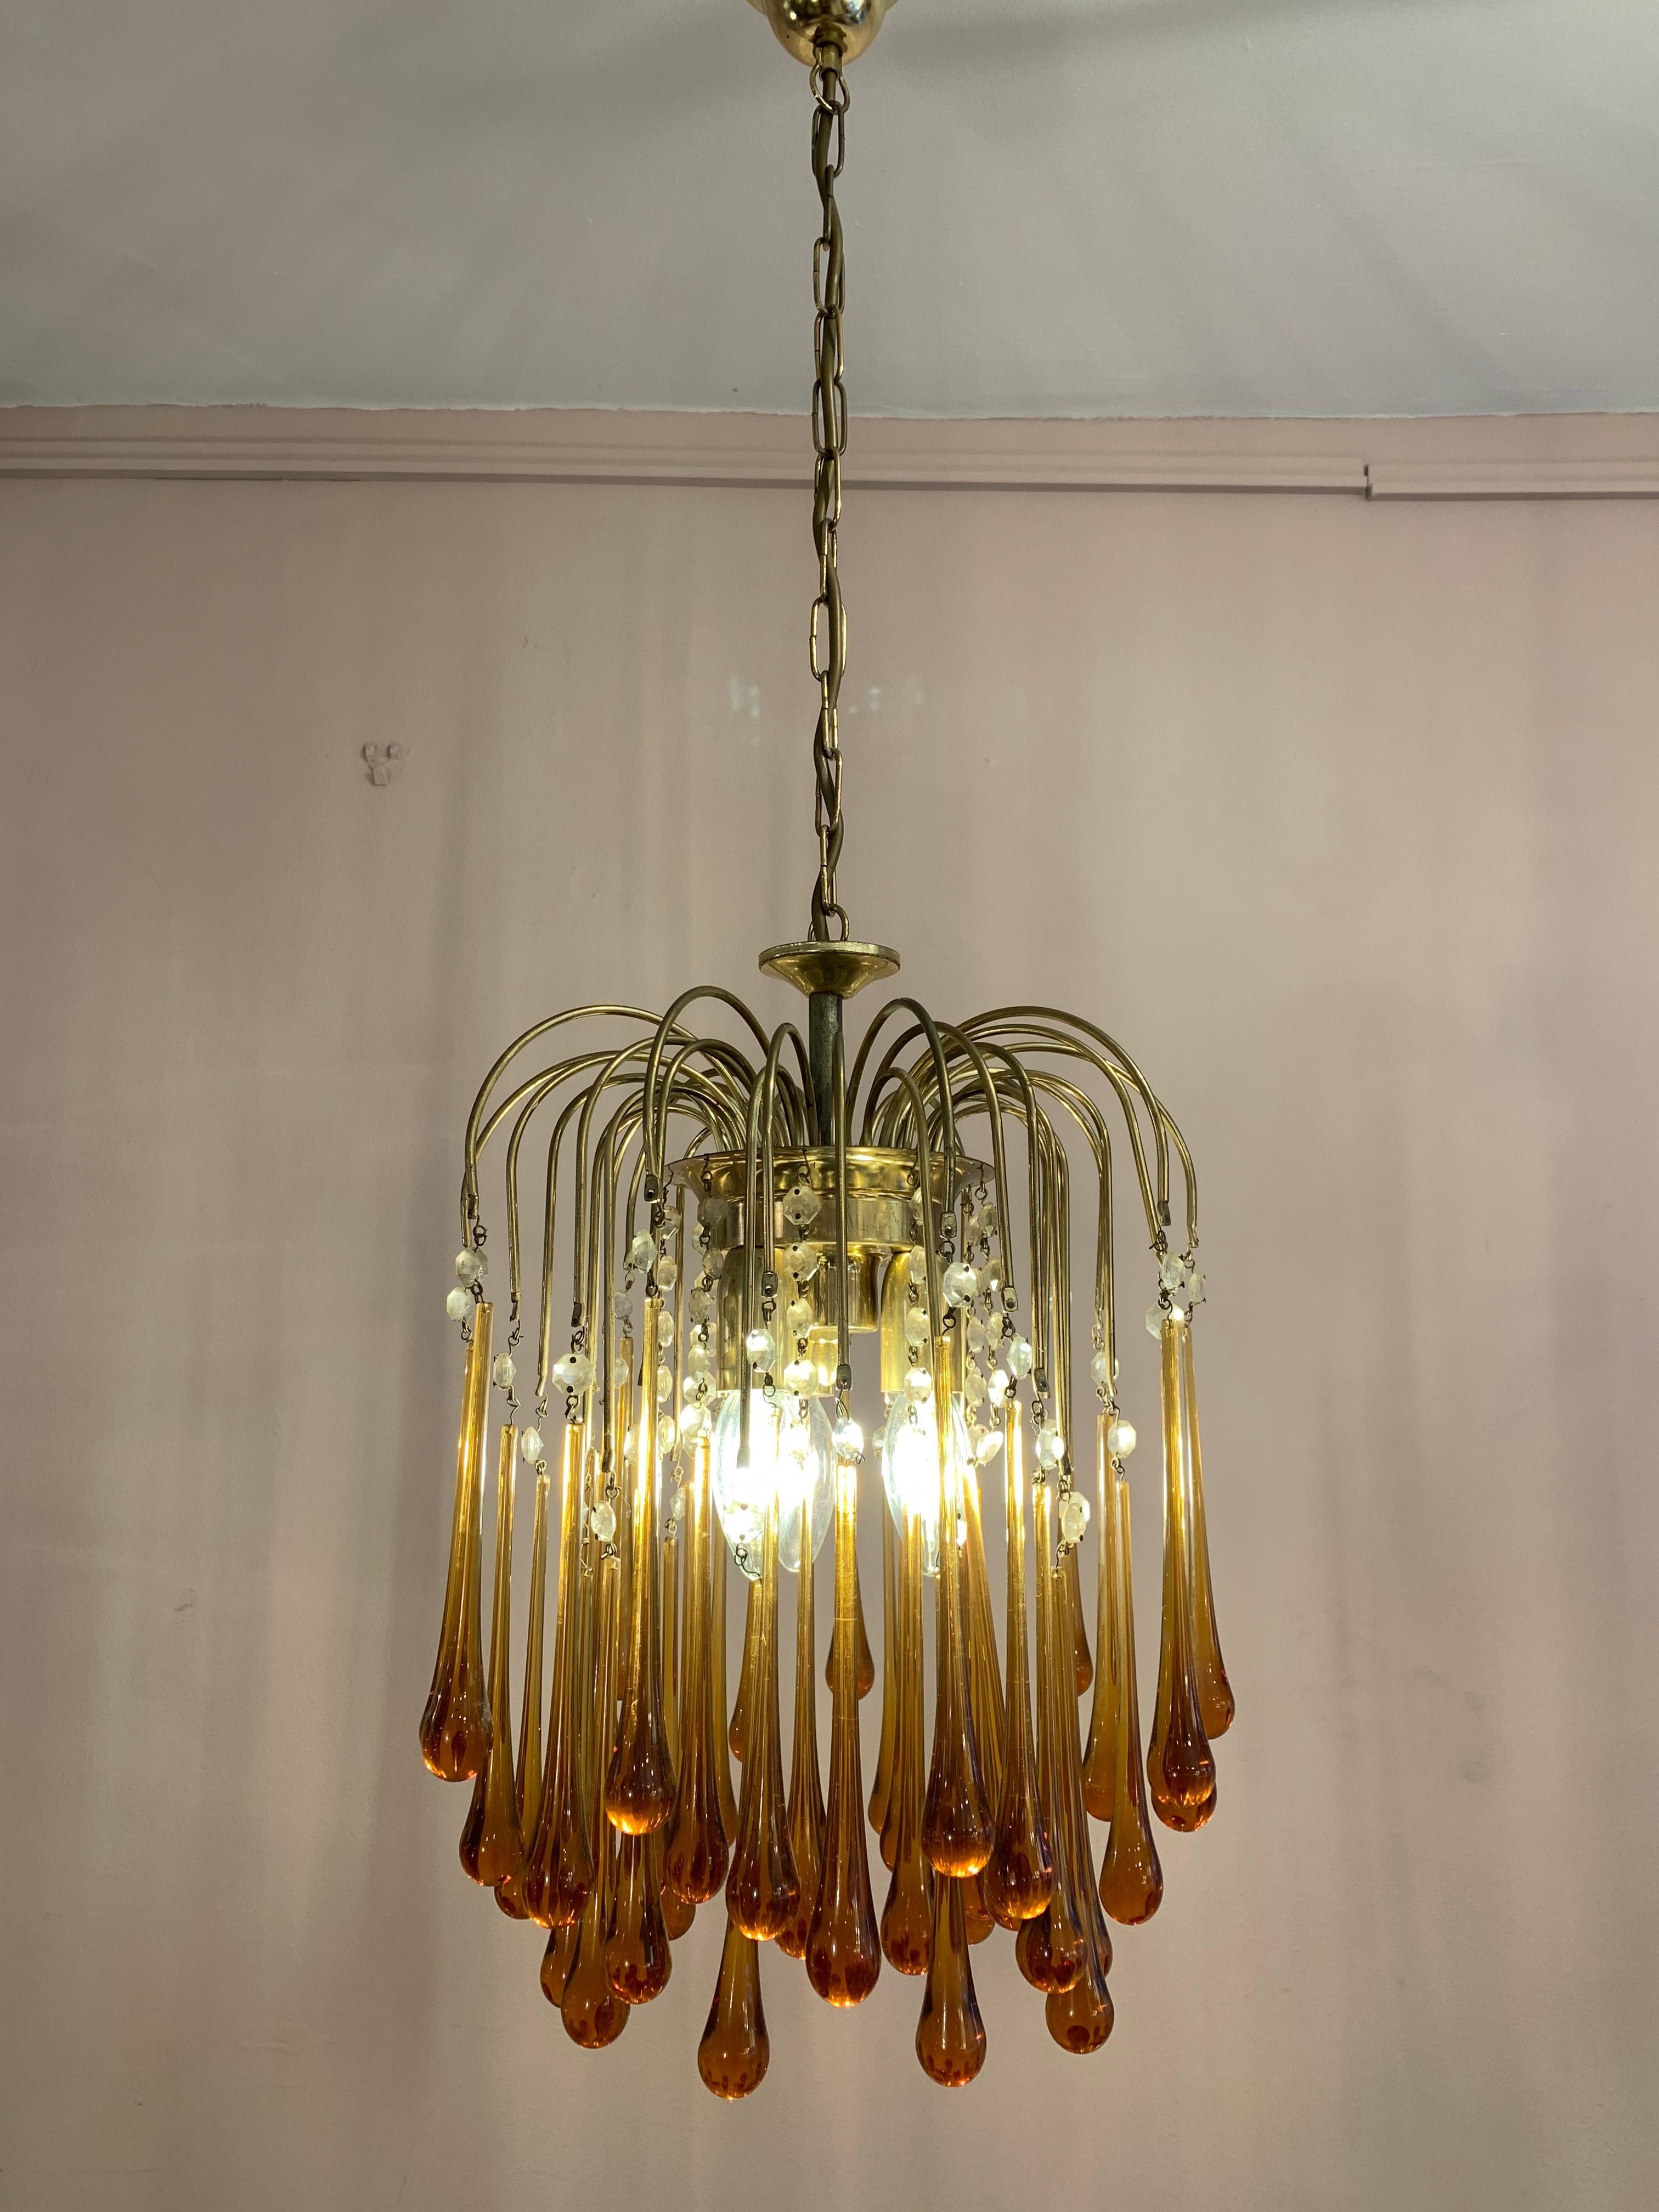 Vintage 1960s Italian Murano, amber-glass, cascading, chandelier designed by Paolo Venini. There are three-tiers of amber glass teardrops suspended from brass stems with clear glass pearls dividing the two.

Three E14 screw-in bulbs sit under the